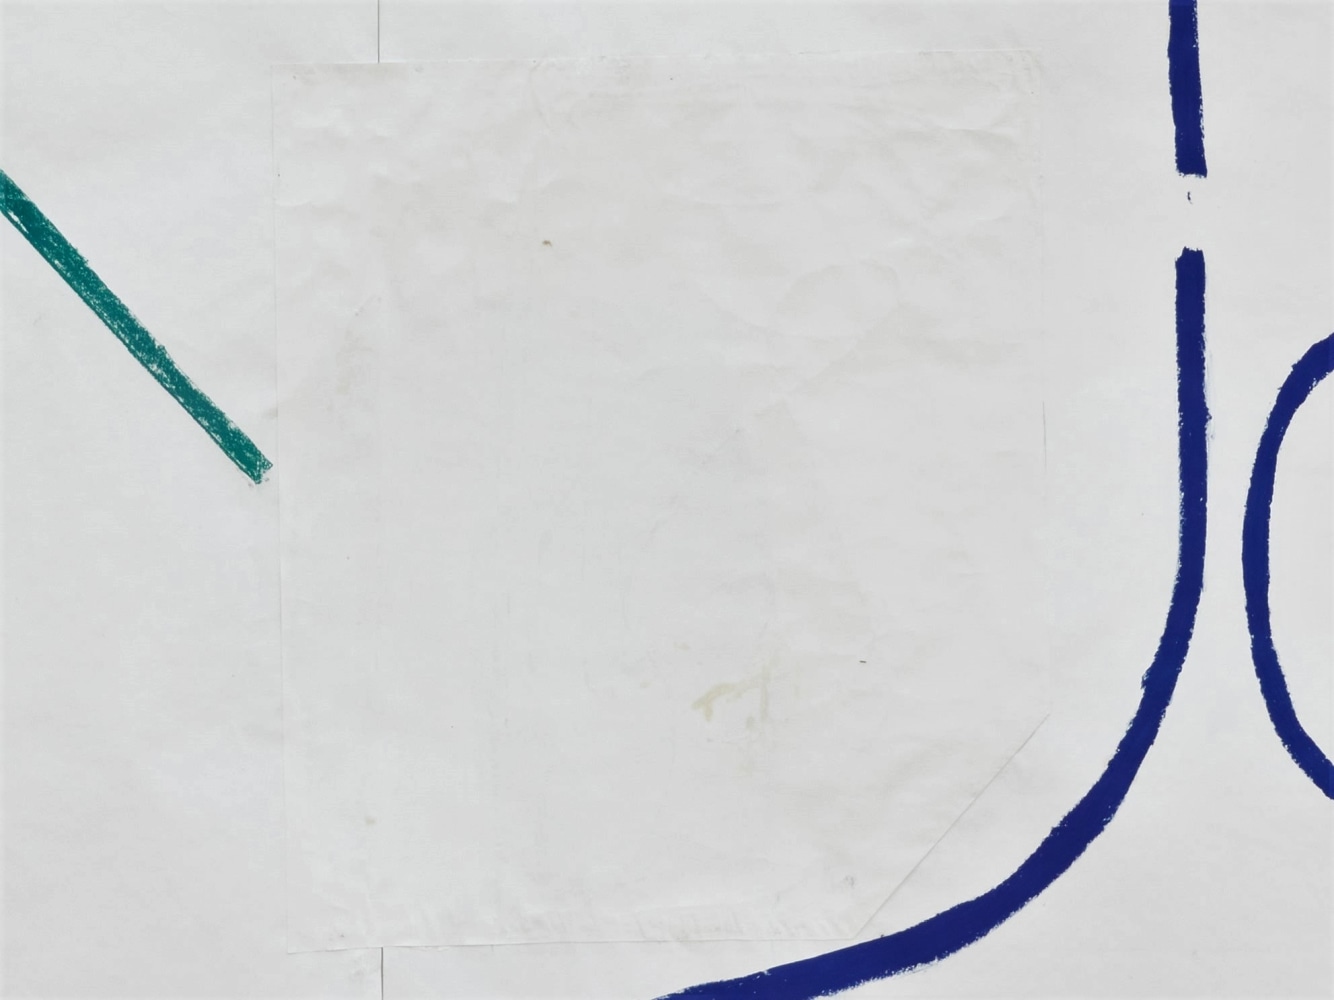 
Esther Kl&amp;auml;s
Ways, 2021
oil stick, pastel and collage on paper
78 3/4 x 118 7/8 inches (200 x 302 cm)